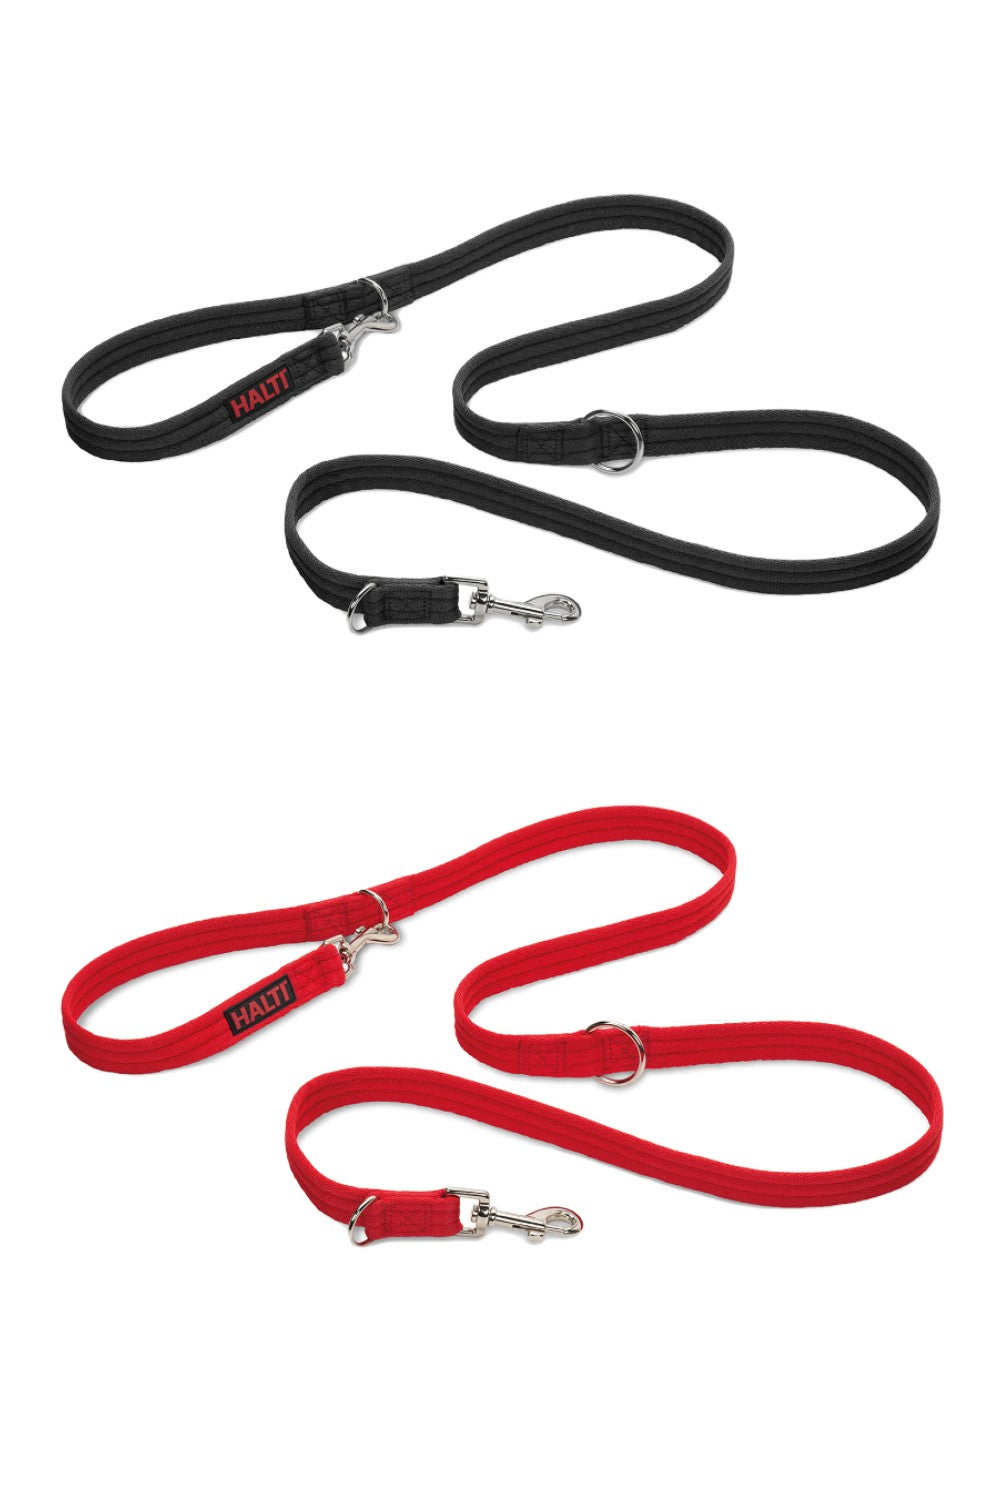 Halti Training Lead In Black and Red